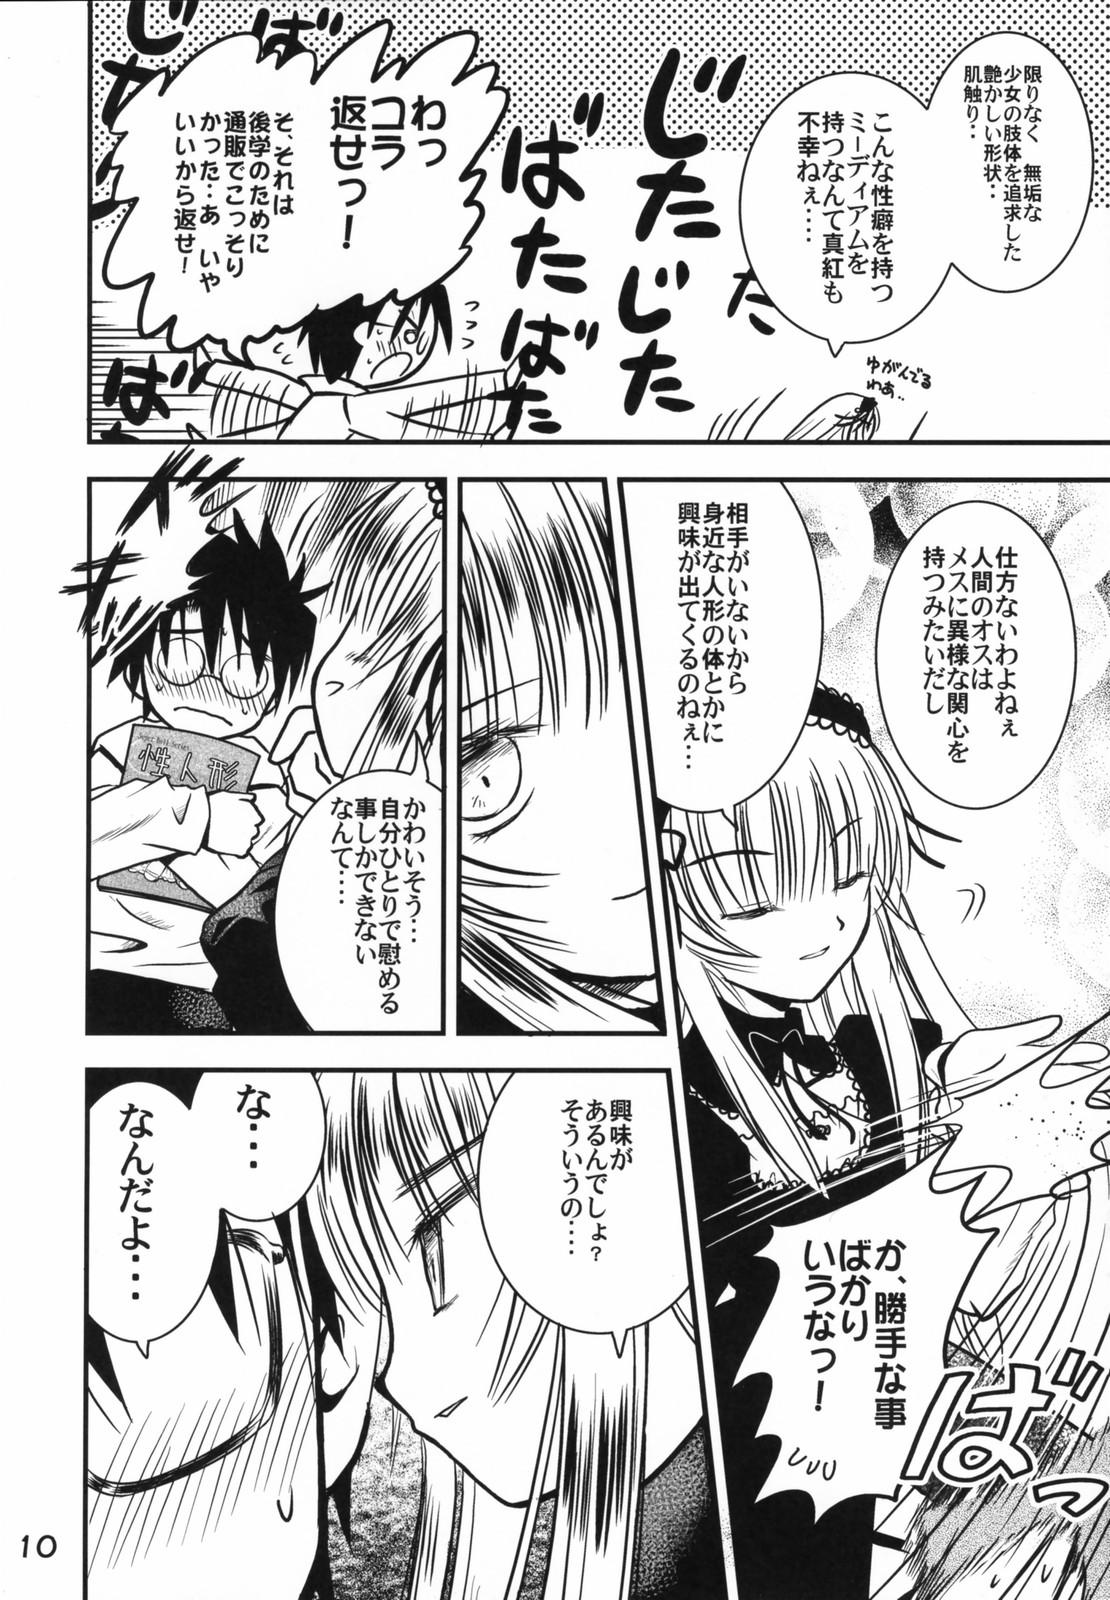 Bang A caprice - Rozen maiden Rabo - Page 9